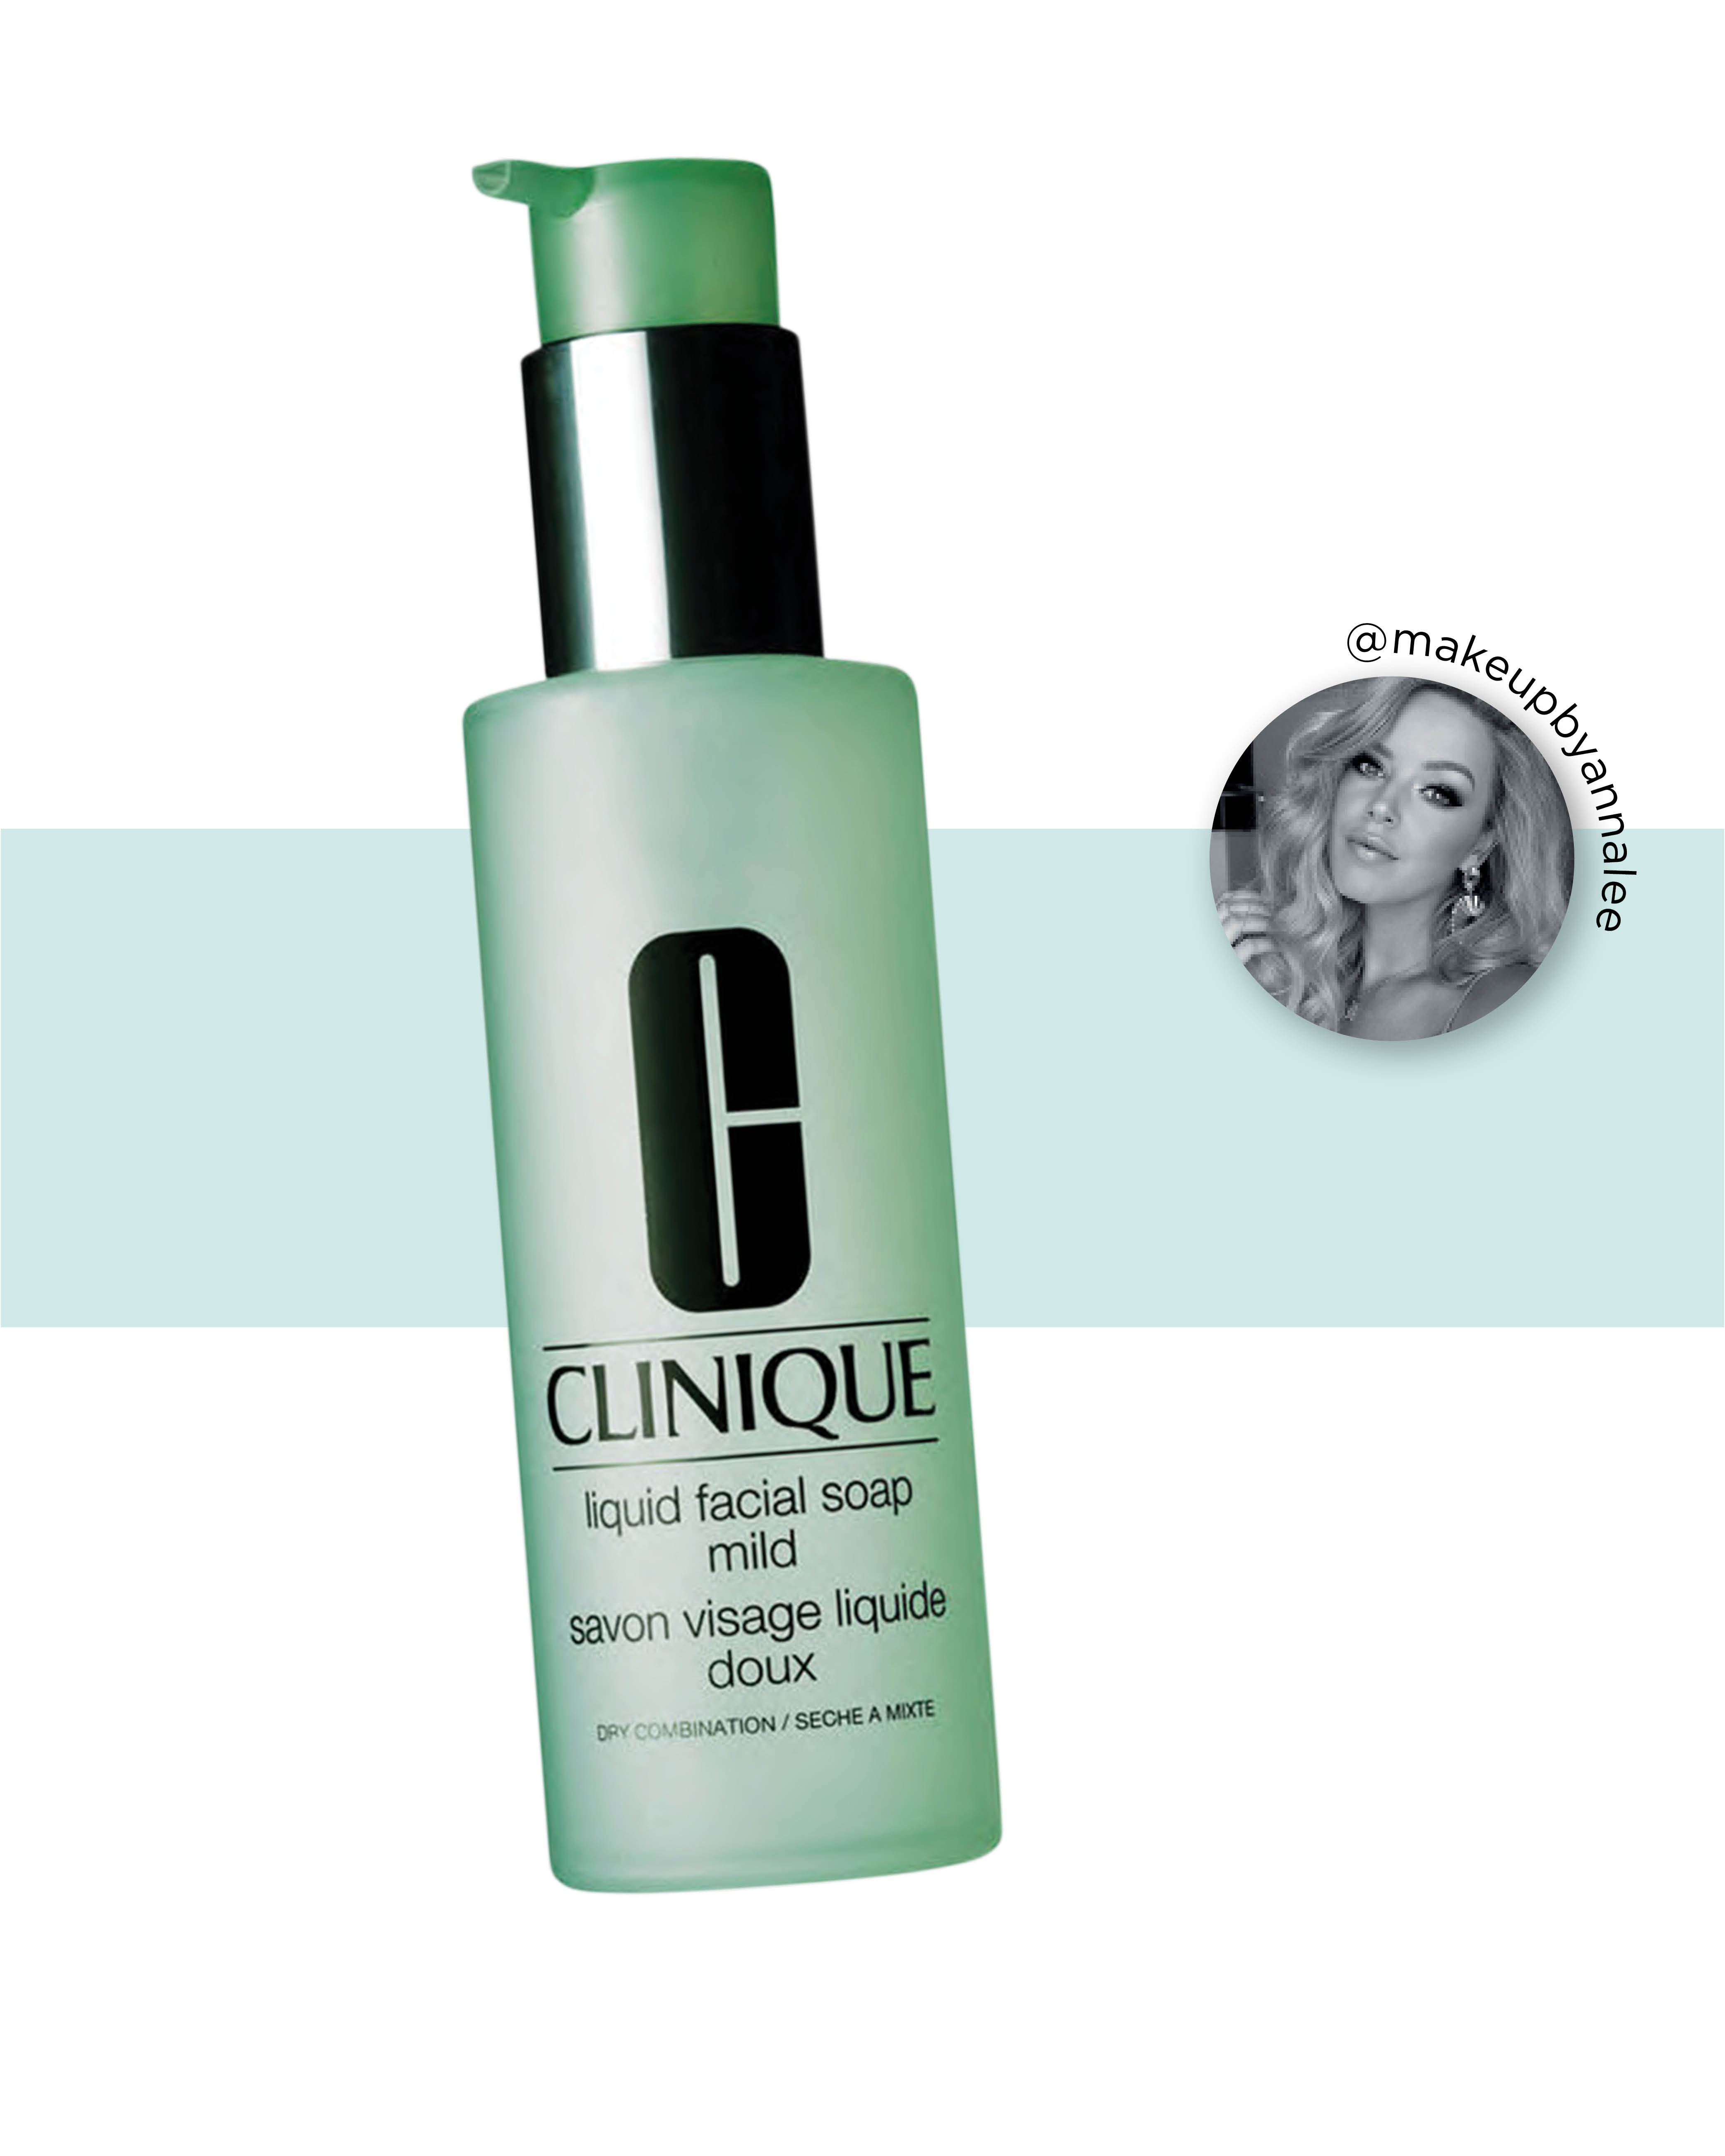 Clinique Mild Liquid Facial Soap, $39. Simple but effective for my dry combination skin, a little goes a long way so I see value in its price point. The foaming action leaves my skin feeling squeaky clean.